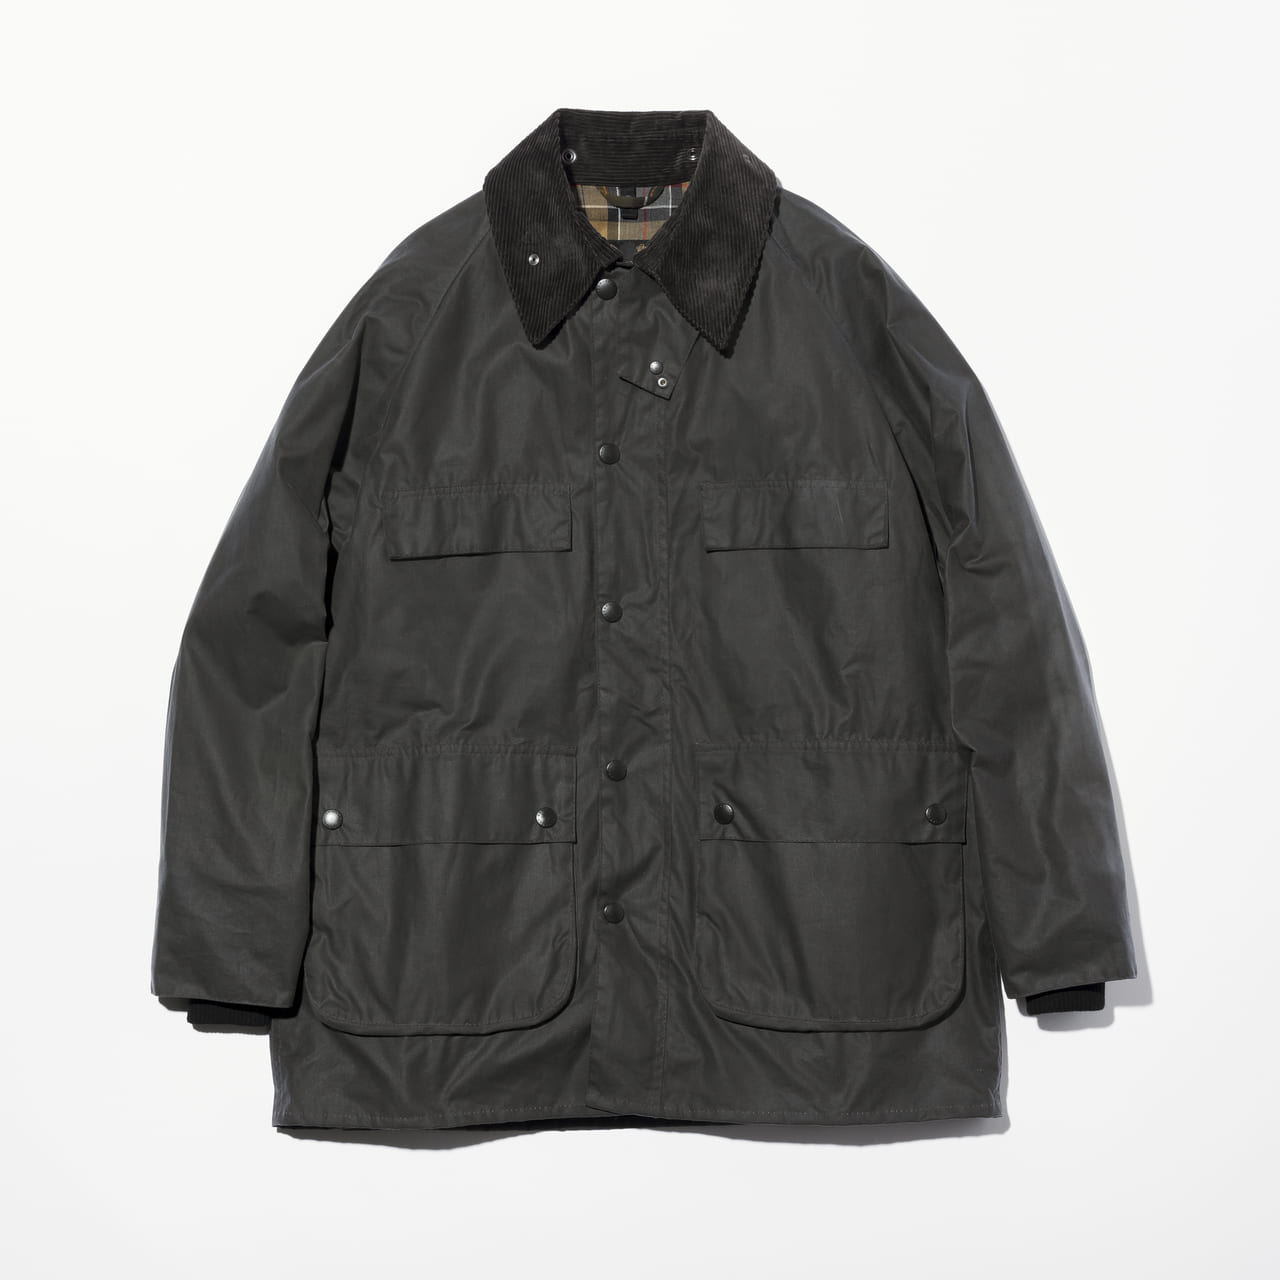 Barbour BEDALE SL  34'' 茶 バーク バブアー ビデイルカラー……茶色バーク